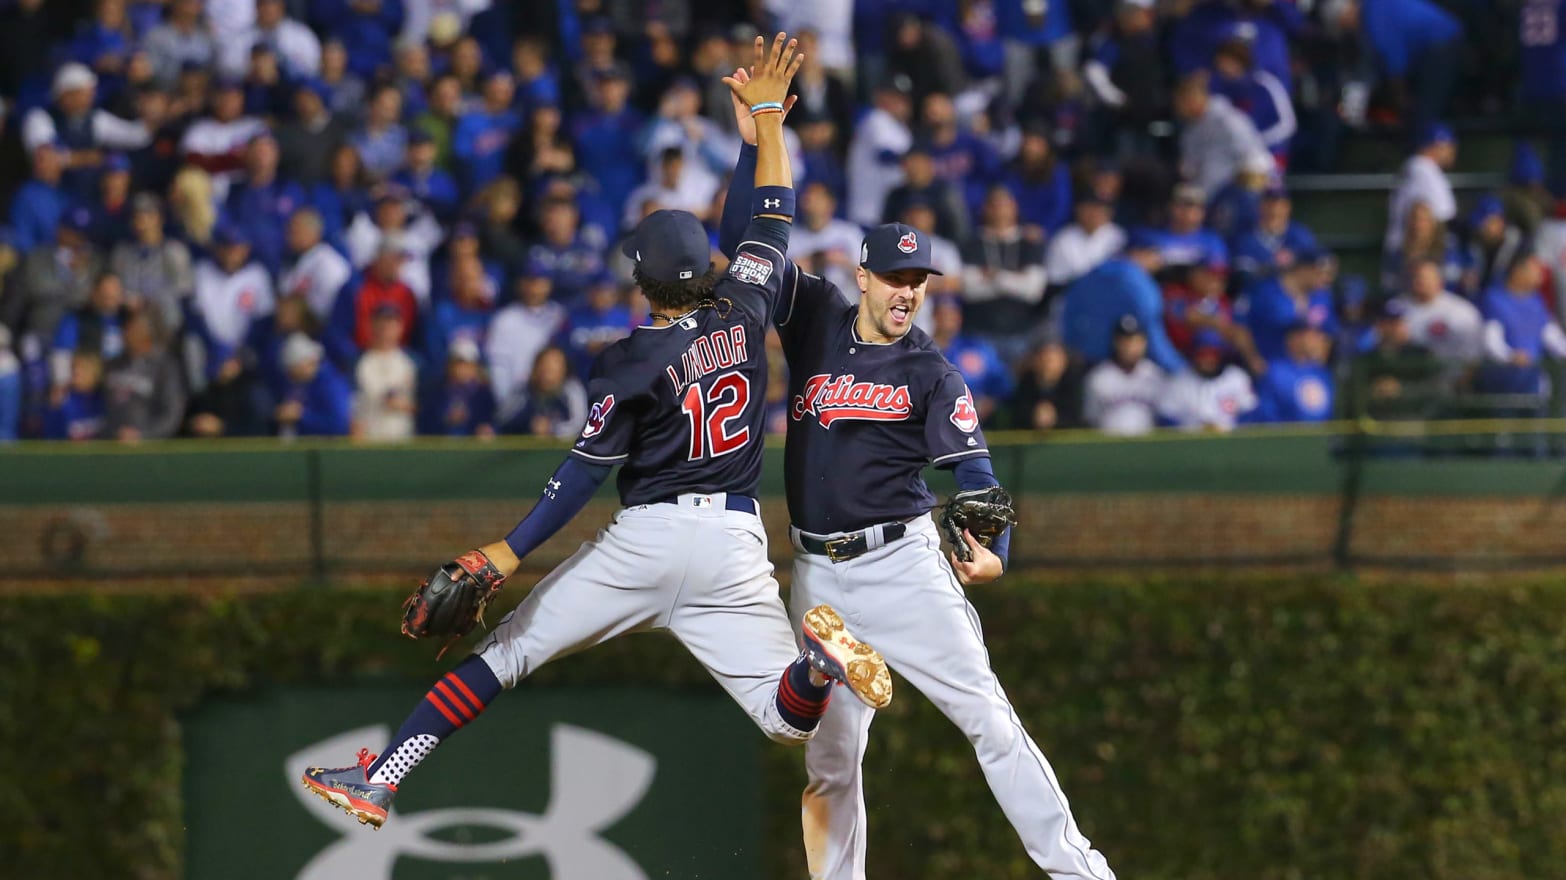 PHOTOS: 2016 MLB World Series, Cubs vs. Indians Game 2